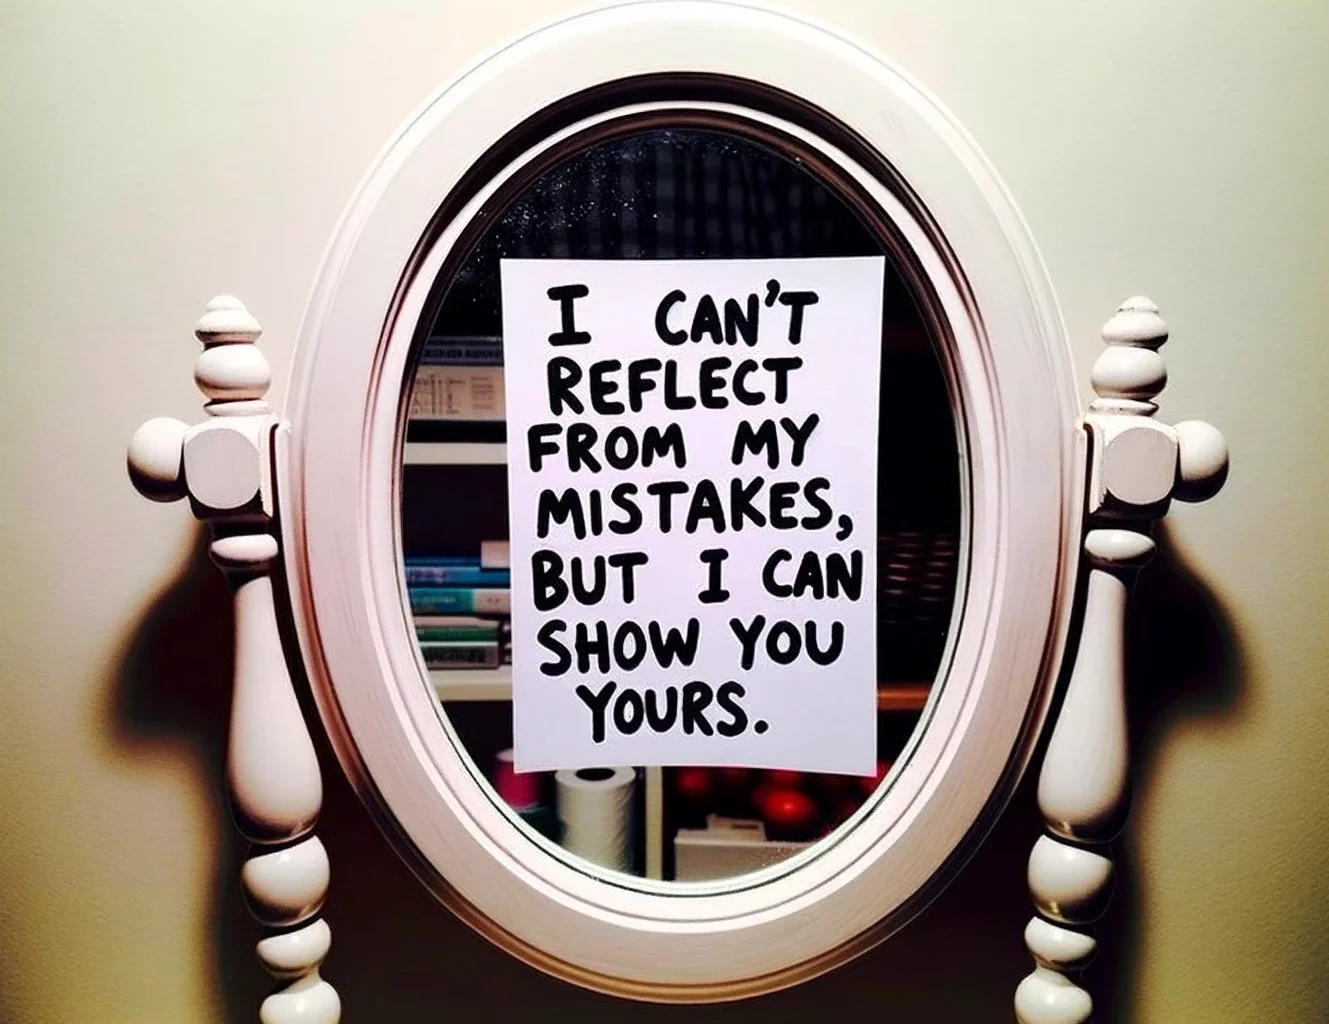 I can’t reflect from my mistakes, but I can show you yours - Mirror Pun